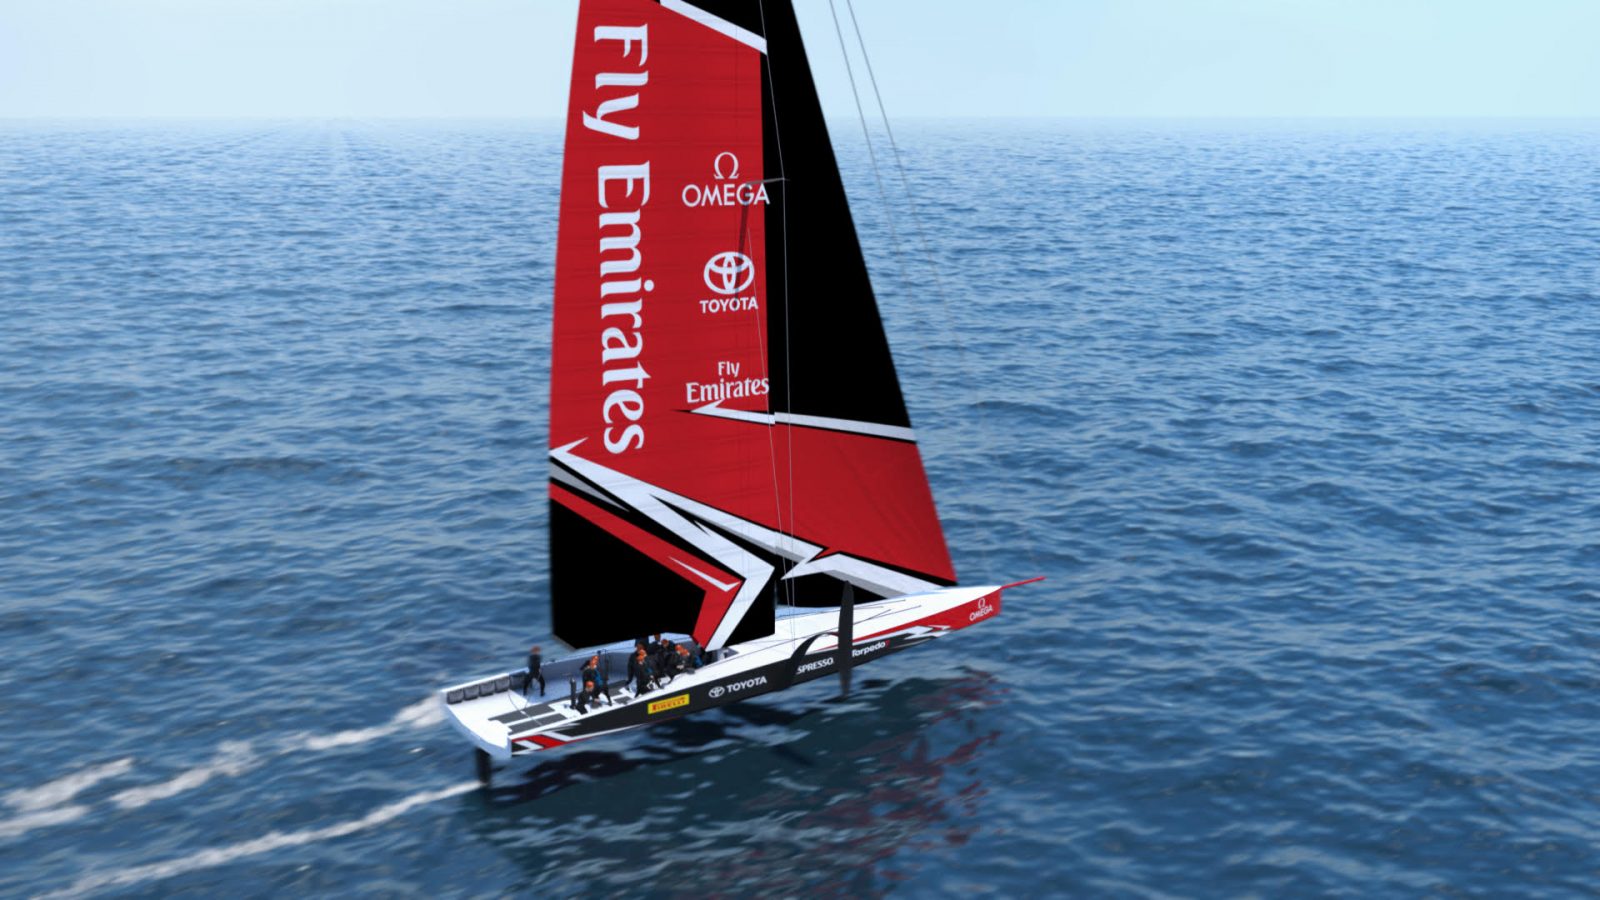 NORTH SAILS CONFIRMED SUPPLIER FOR 36TH AMERICA’S CUP